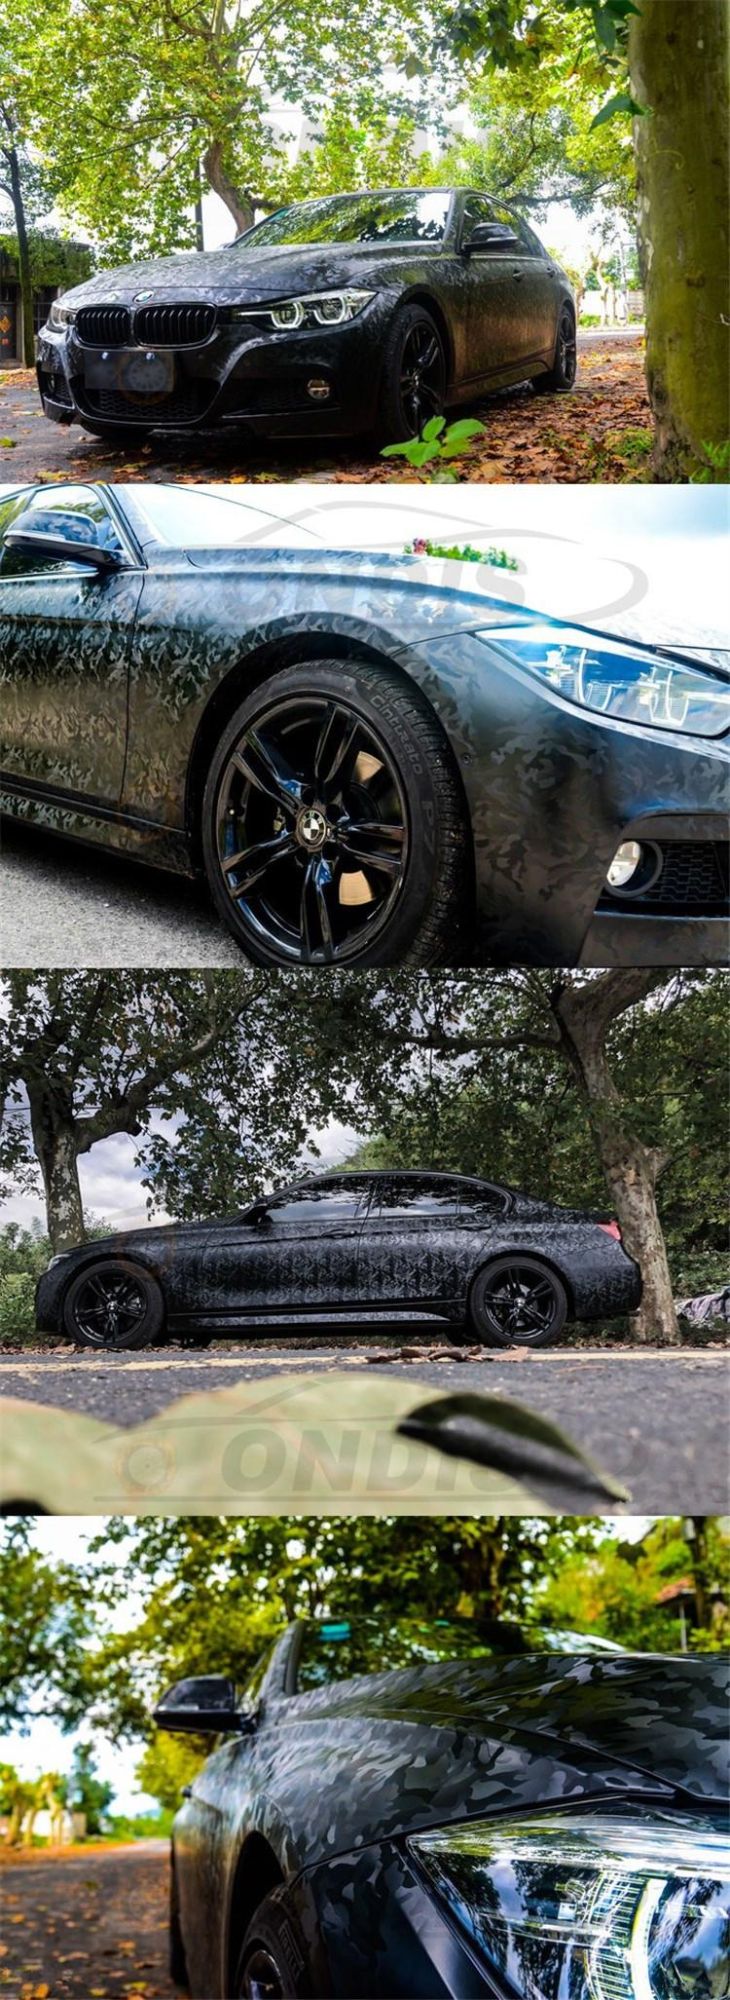 Matte 3D Ghost Black Vinyl Wrap Film Automobiles Car Wrapping Stickers with Air Free Bubble